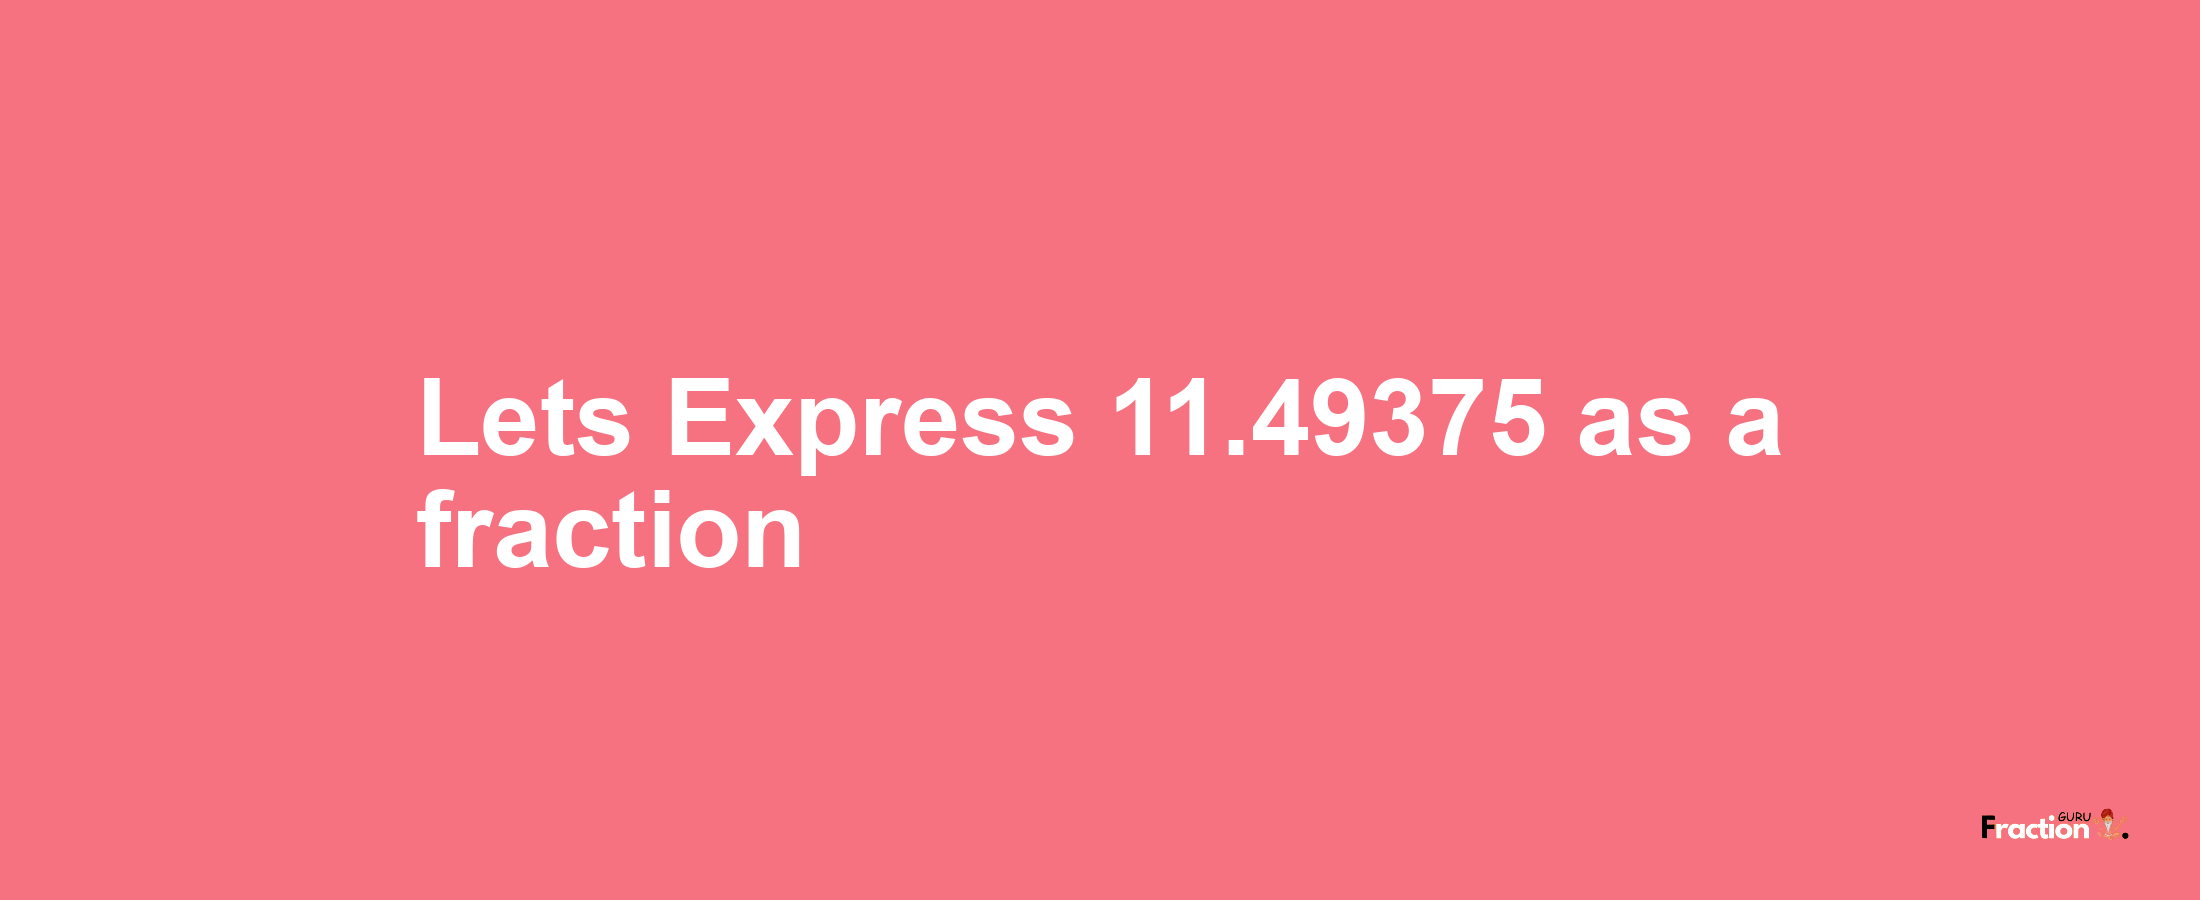 Lets Express 11.49375 as afraction